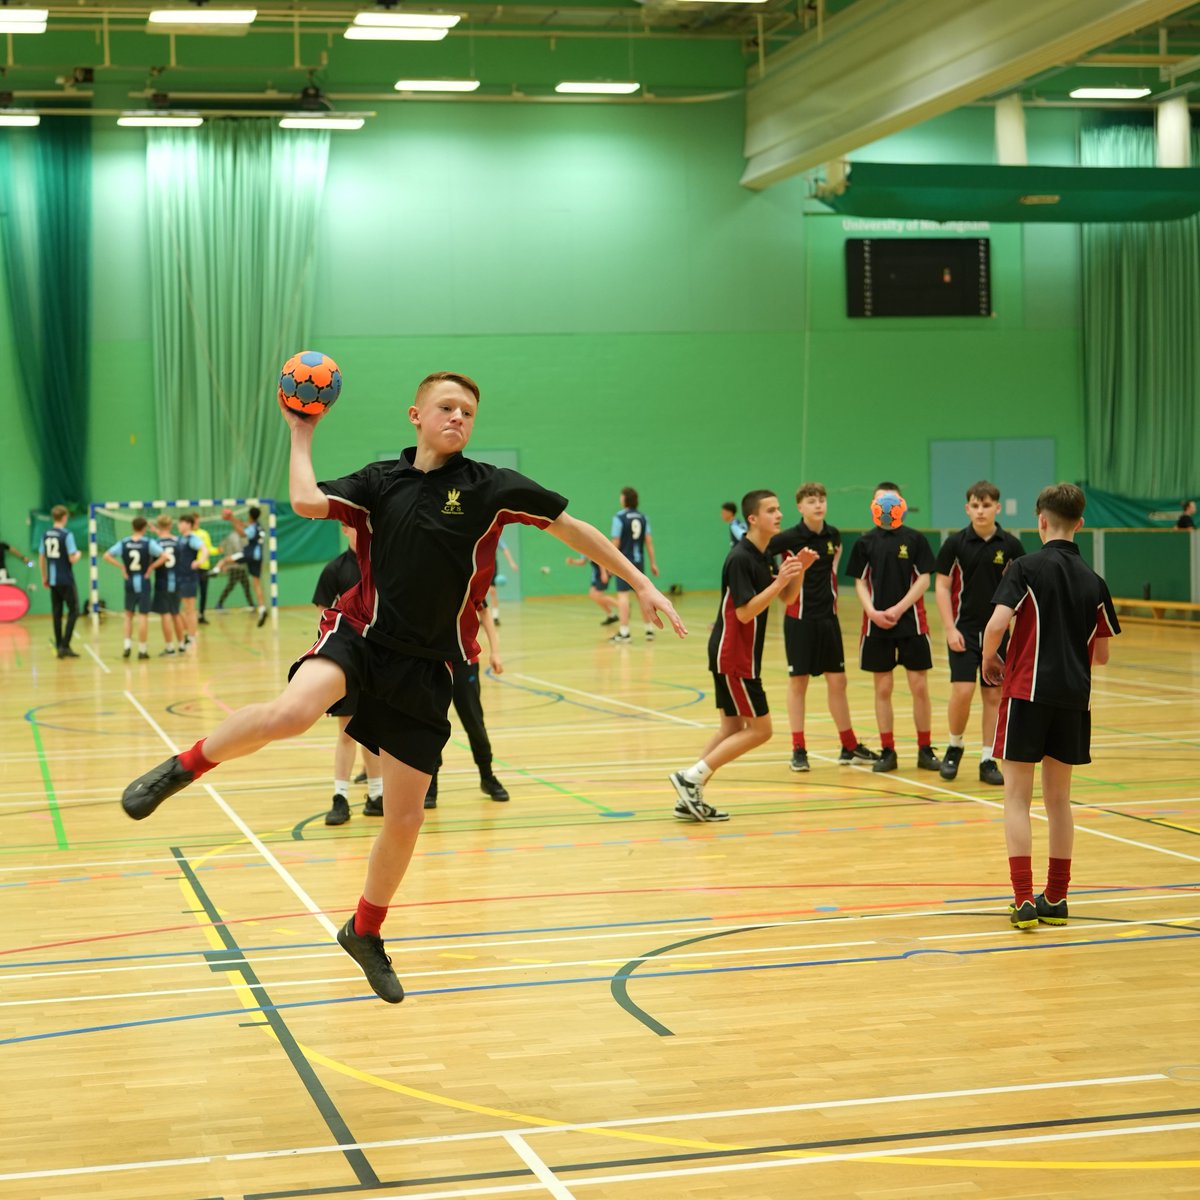 What a morning it has been! 400 players from 10 schools have been fighting it out to become Handball Cup Champions! We've got the semi finals, 3rd/4th play offs and the final this afternoon... stay tuned! 😀 #RedhillTrustSport #HandballCup2024 #Handball